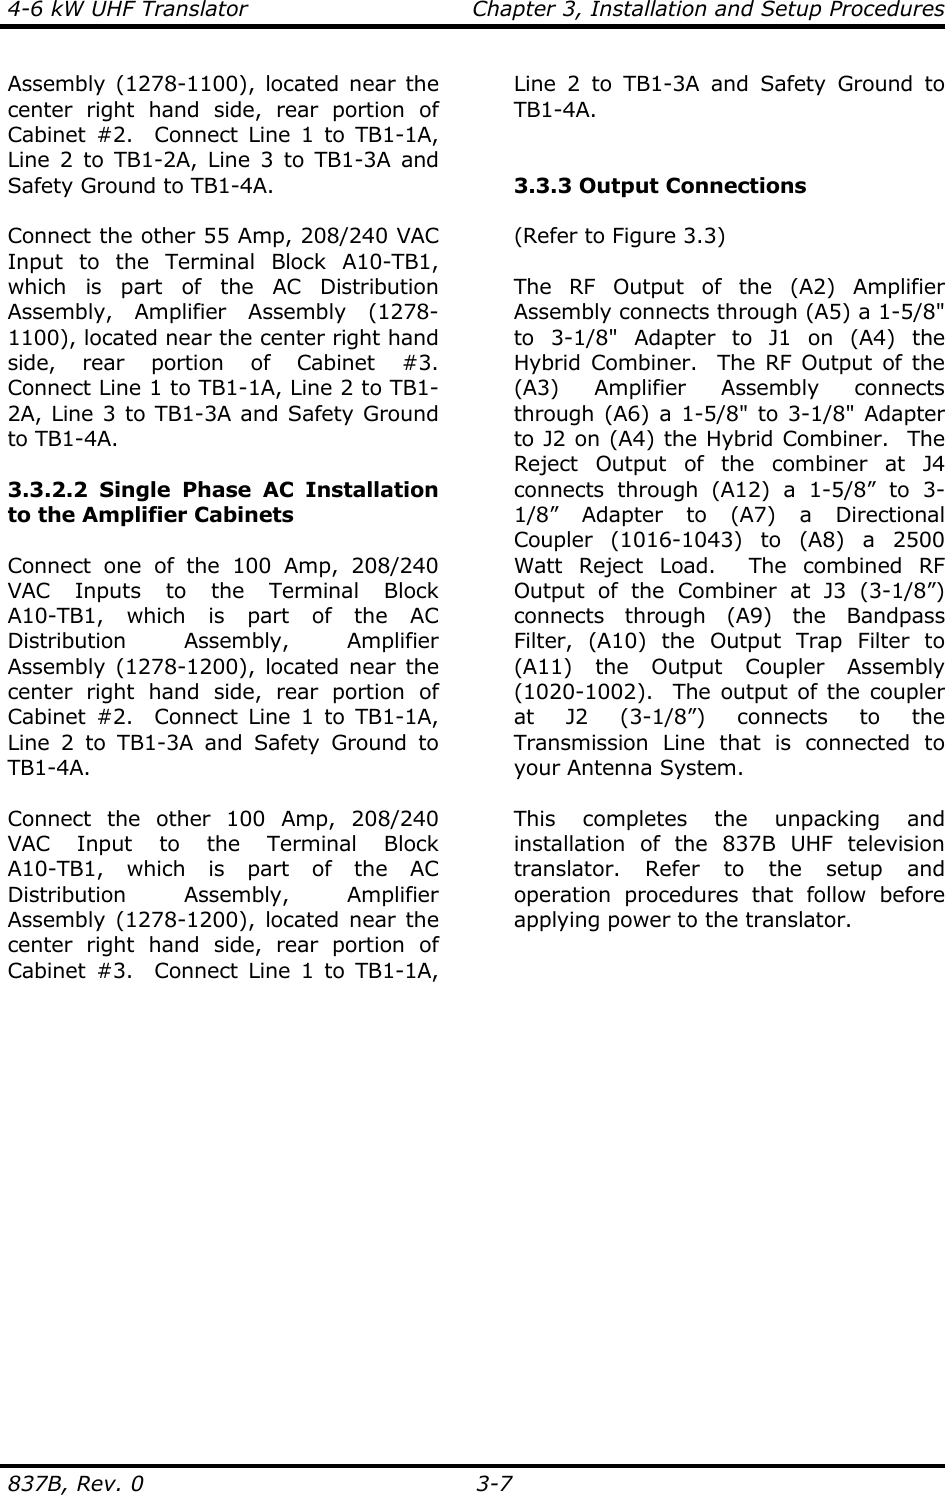 4-6 kW UHF Translator  Chapter 3, Installation and Setup Procedures  837B, Rev. 0 3-7 Assembly (1278-1100), located near the center right hand side, rear portion of Cabinet #2.  Connect Line 1 to TB1-1A, Line 2 to TB1-2A, Line 3 to TB1-3A and Safety Ground to TB1-4A.   Connect the other 55 Amp, 208/240 VAC Input to the Terminal Block A10-TB1, which is part of the AC Distribution Assembly, Amplifier Assembly (1278-1100), located near the center right hand side, rear portion of Cabinet #3.  Connect Line 1 to TB1-1A, Line 2 to TB1-2A, Line 3 to TB1-3A and Safety Ground to TB1-4A.   3.3.2.2 Single Phase AC Installation to the Amplifier Cabinets  Connect one of the 100 Amp, 208/240 VAC Inputs to the Terminal Block A10-TB1, which is part of the AC Distribution Assembly, Amplifier Assembly (1278-1200), located near the center right hand side, rear portion of Cabinet #2.  Connect Line 1 to TB1-1A, Line 2 to TB1-3A and Safety Ground to TB1-4A.   Connect the other 100 Amp, 208/240 VAC Input to the Terminal Block A10-TB1, which is part of the AC Distribution Assembly, Amplifier Assembly (1278-1200), located near the center right hand side, rear portion of Cabinet #3.  Connect Line 1 to TB1-1A, Line 2 to TB1-3A and Safety Ground to TB1-4A.    3.3.3 Output Connections  (Refer to Figure 3.3)  The RF Output of the (A2) Amplifier Assembly connects through (A5) a 1-5/8&quot; to 3-1/8&quot; Adapter to J1 on (A4) the Hybrid Combiner.  The RF Output of the (A3) Amplifier Assembly connects through (A6) a 1-5/8&quot; to 3-1/8&quot; Adapter to J2 on (A4) the Hybrid Combiner.  The Reject Output of the combiner at J4 connects through (A12) a 1-5/8” to 3-1/8” Adapter to (A7) a Directional Coupler (1016-1043) to (A8) a 2500 Watt Reject Load.  The combined RF Output of the Combiner at J3 (3-1/8”) connects through (A9) the Bandpass Filter, (A10) the Output Trap Filter to (A11) the Output Coupler Assembly (1020-1002).  The output of the coupler at J2 (3-1/8”) connects to the Transmission Line that is connected to your Antenna System.  This completes the unpacking and installation of the 837B UHF television translator. Refer to the setup and operation procedures that follow before applying power to the translator.  